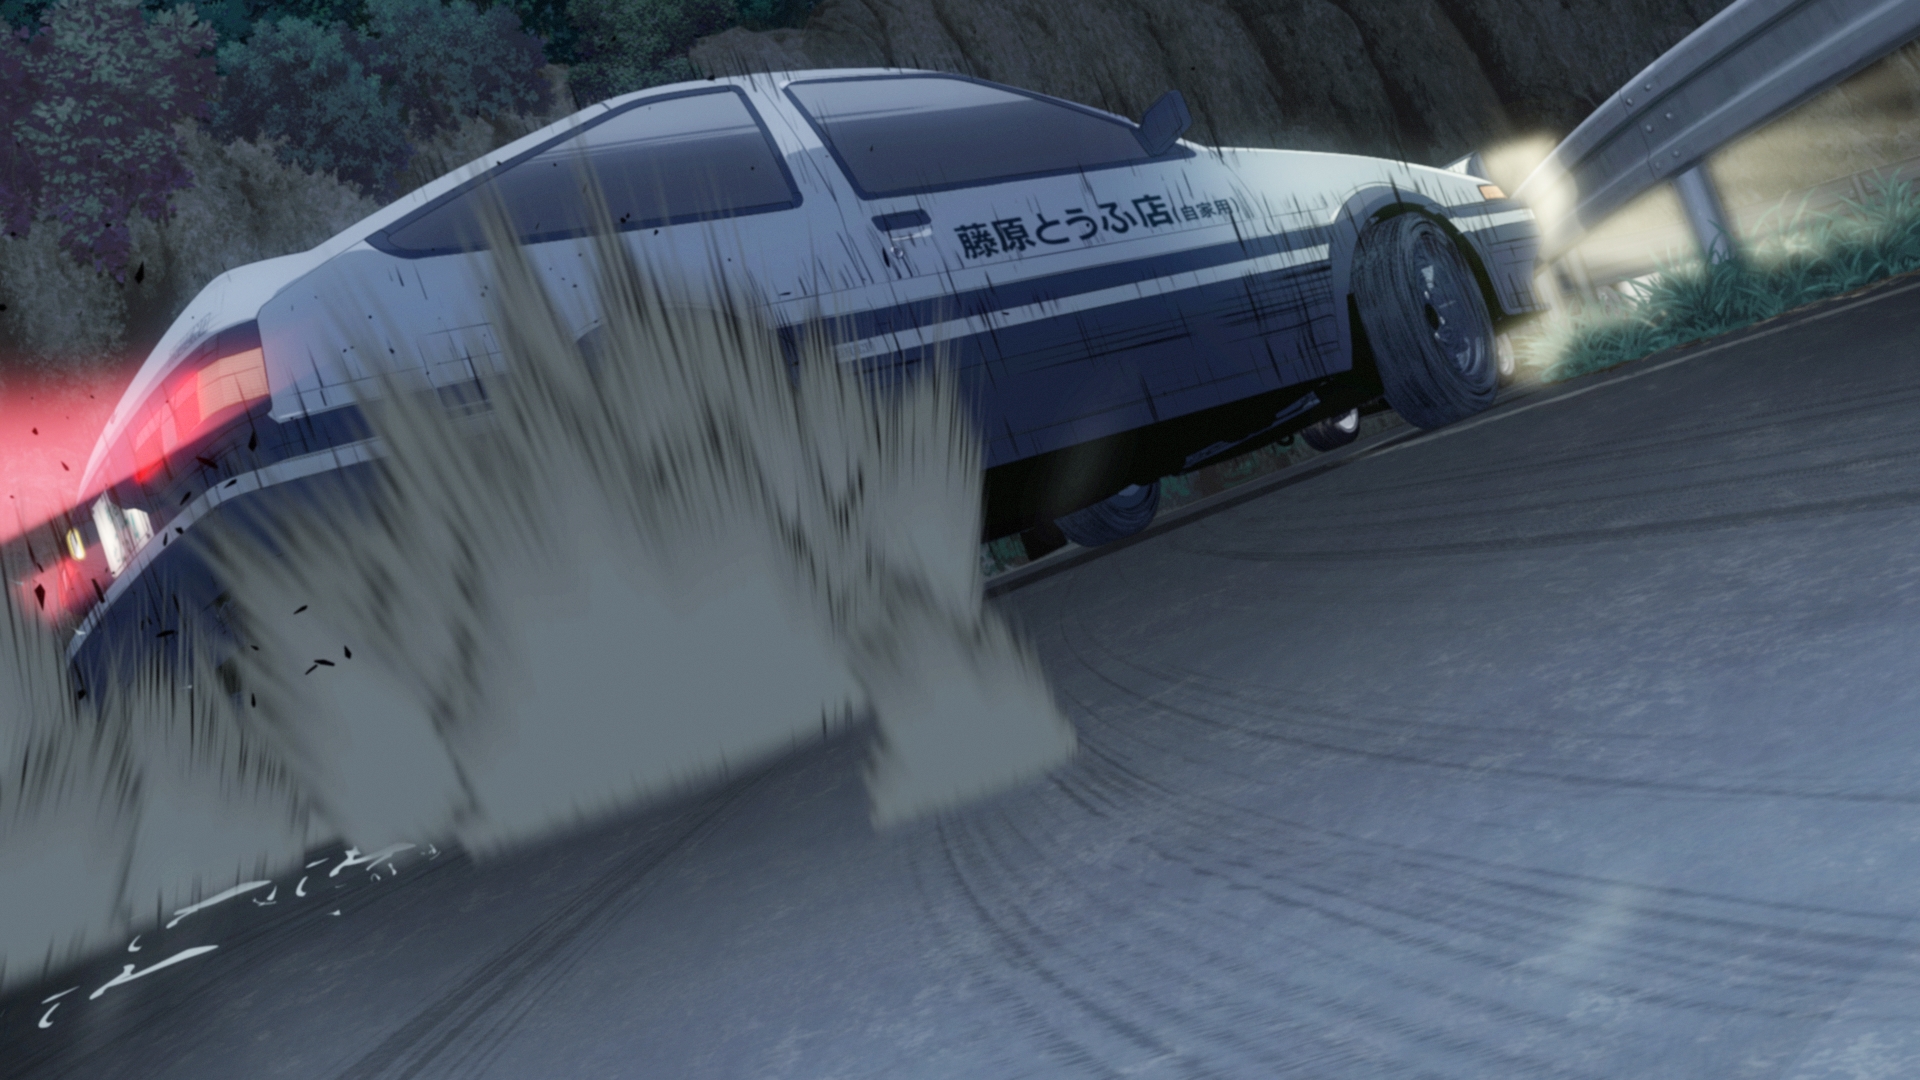 The 3rd New Initial D movie is a blast as it includes a race between the drivers, who have amazing driving techniques.